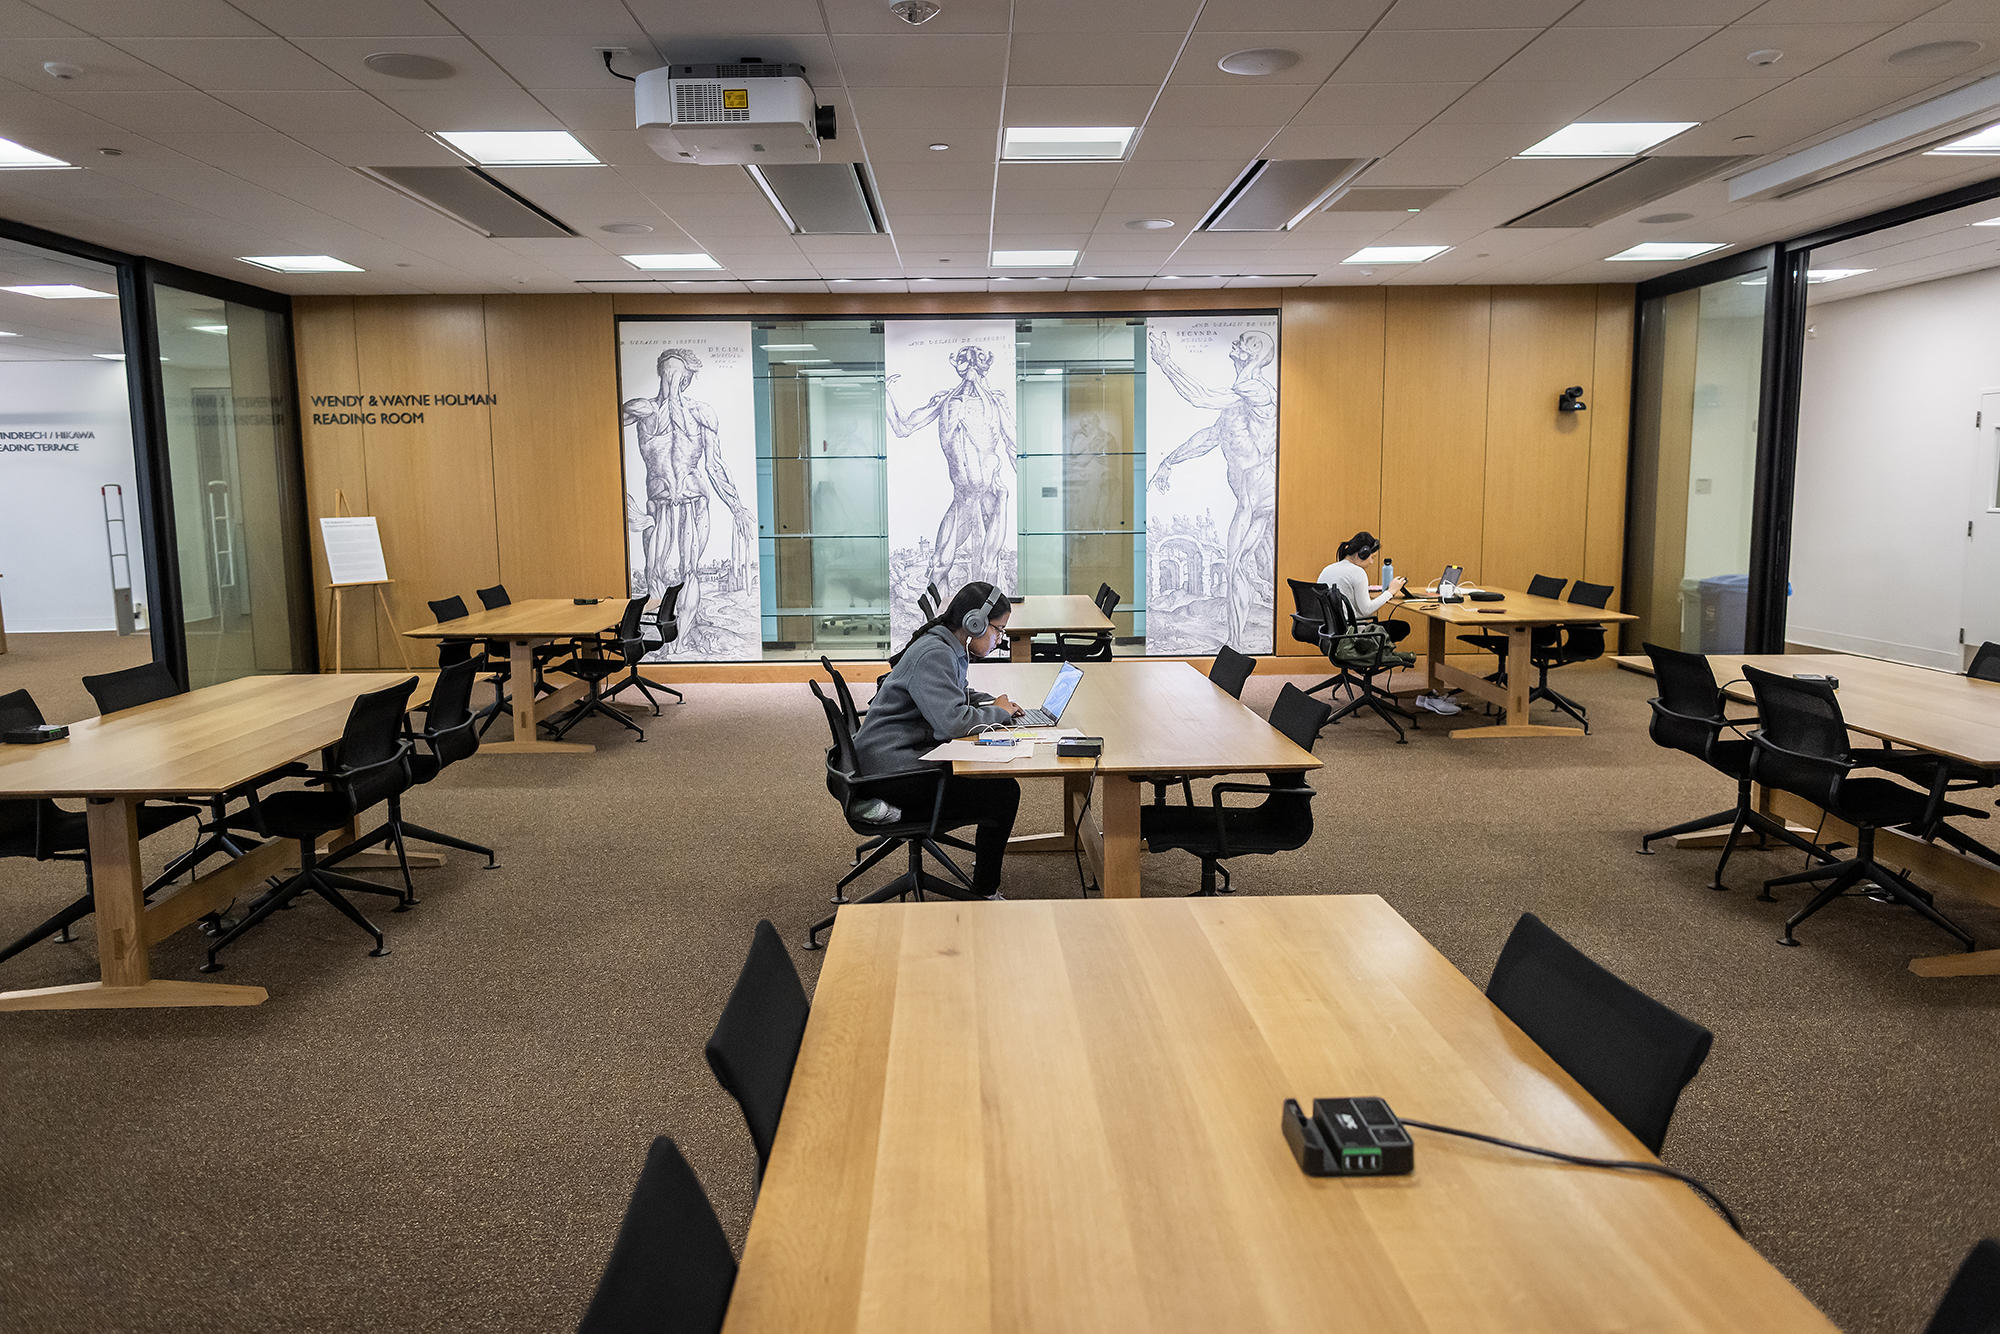 wide view of holman reading room with students studying